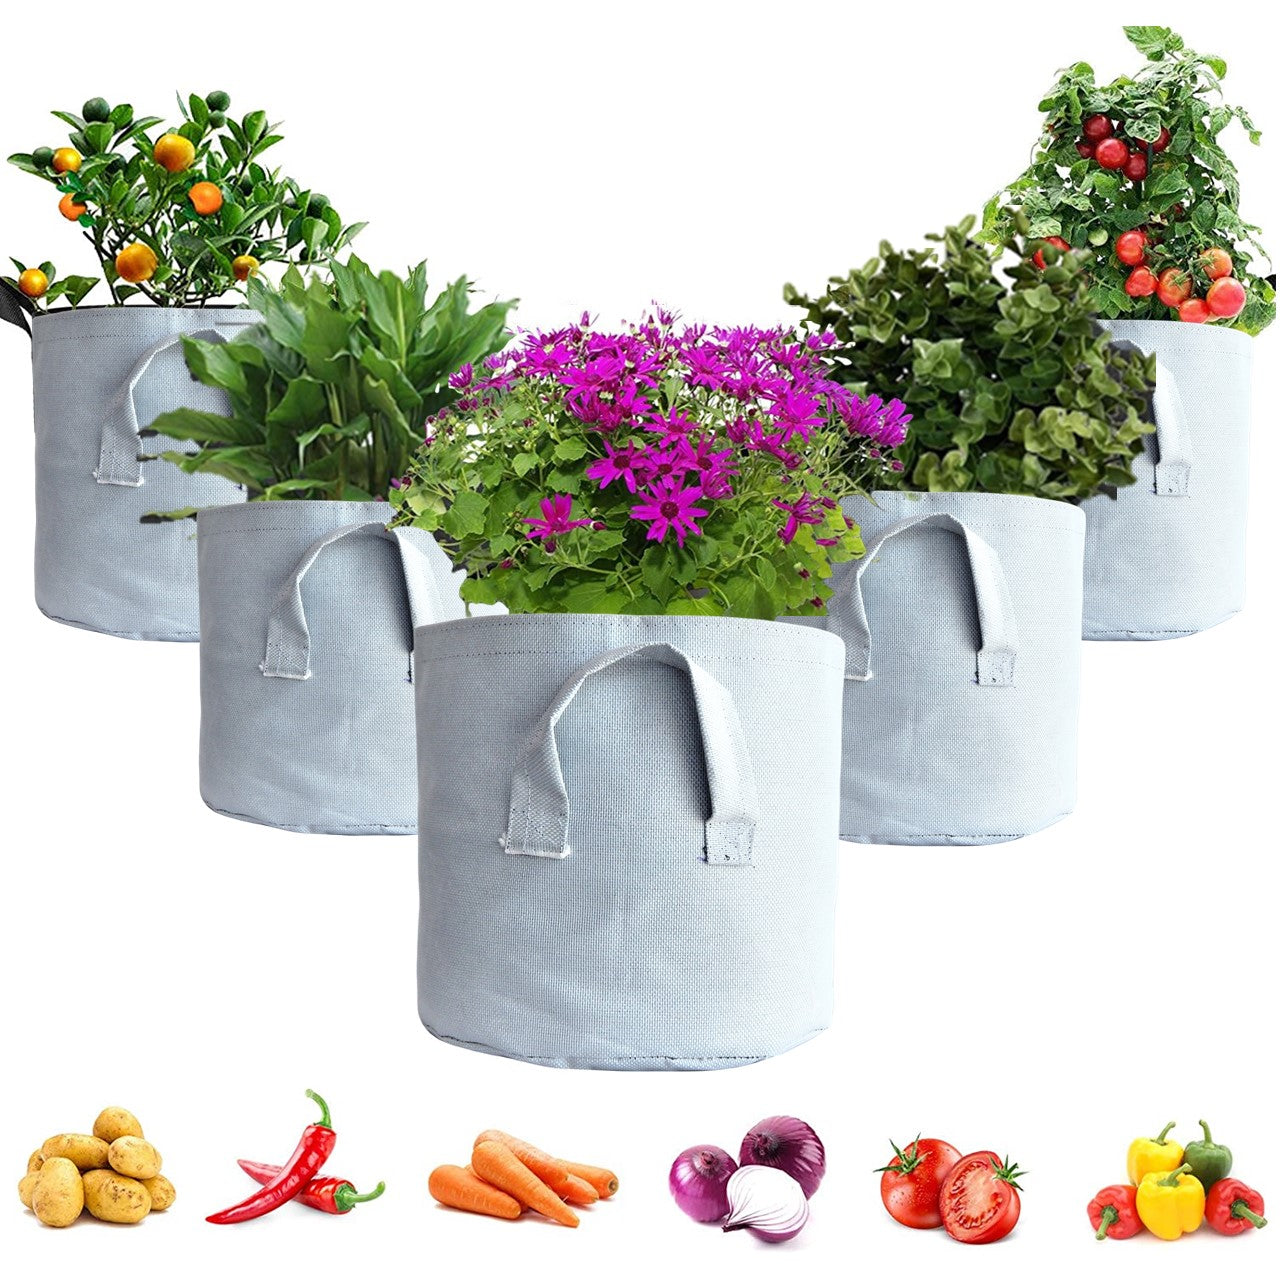 Buy Fabric Grow Bags  Durable and Convenient Fabric Pots for Plants   LazyGardener